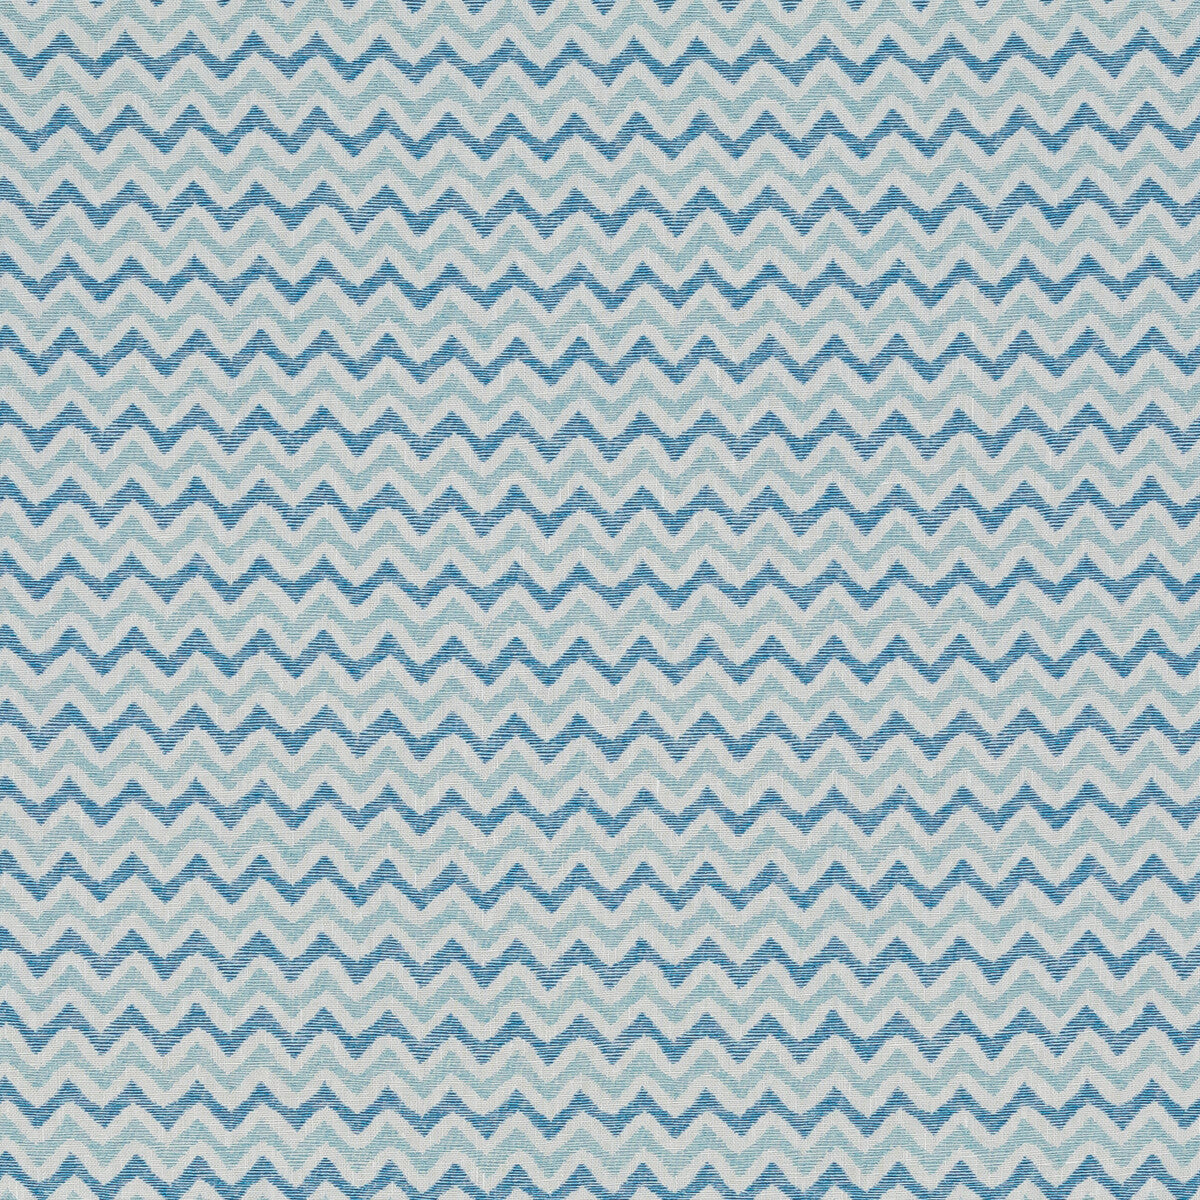 Baby Colebrook fabric in blue color - pattern BFC-3698.5.0 - by Lee Jofa in the Blithfield collection